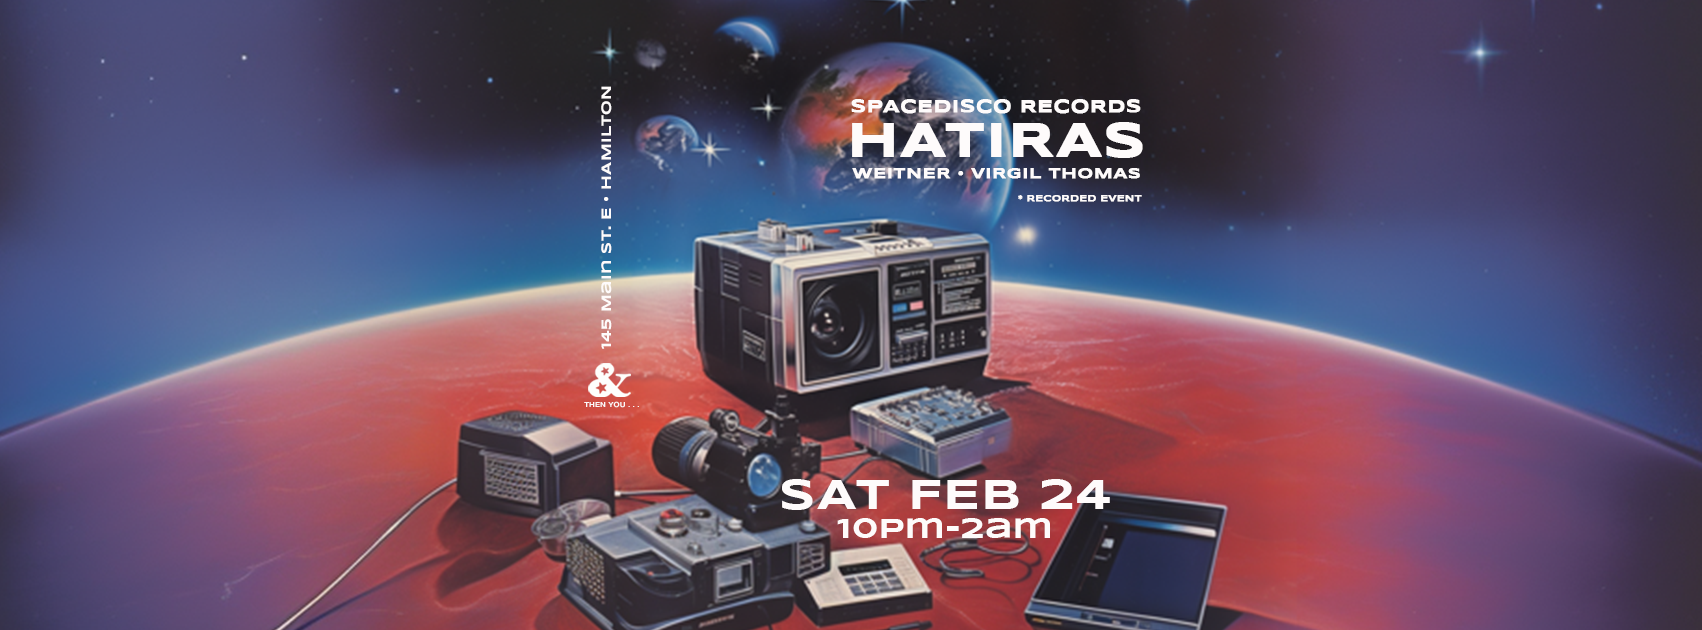 Hatiras + Spacedisco Records filmed event at &ThenYou + Weitner, Virgil Thomas - フライヤー裏